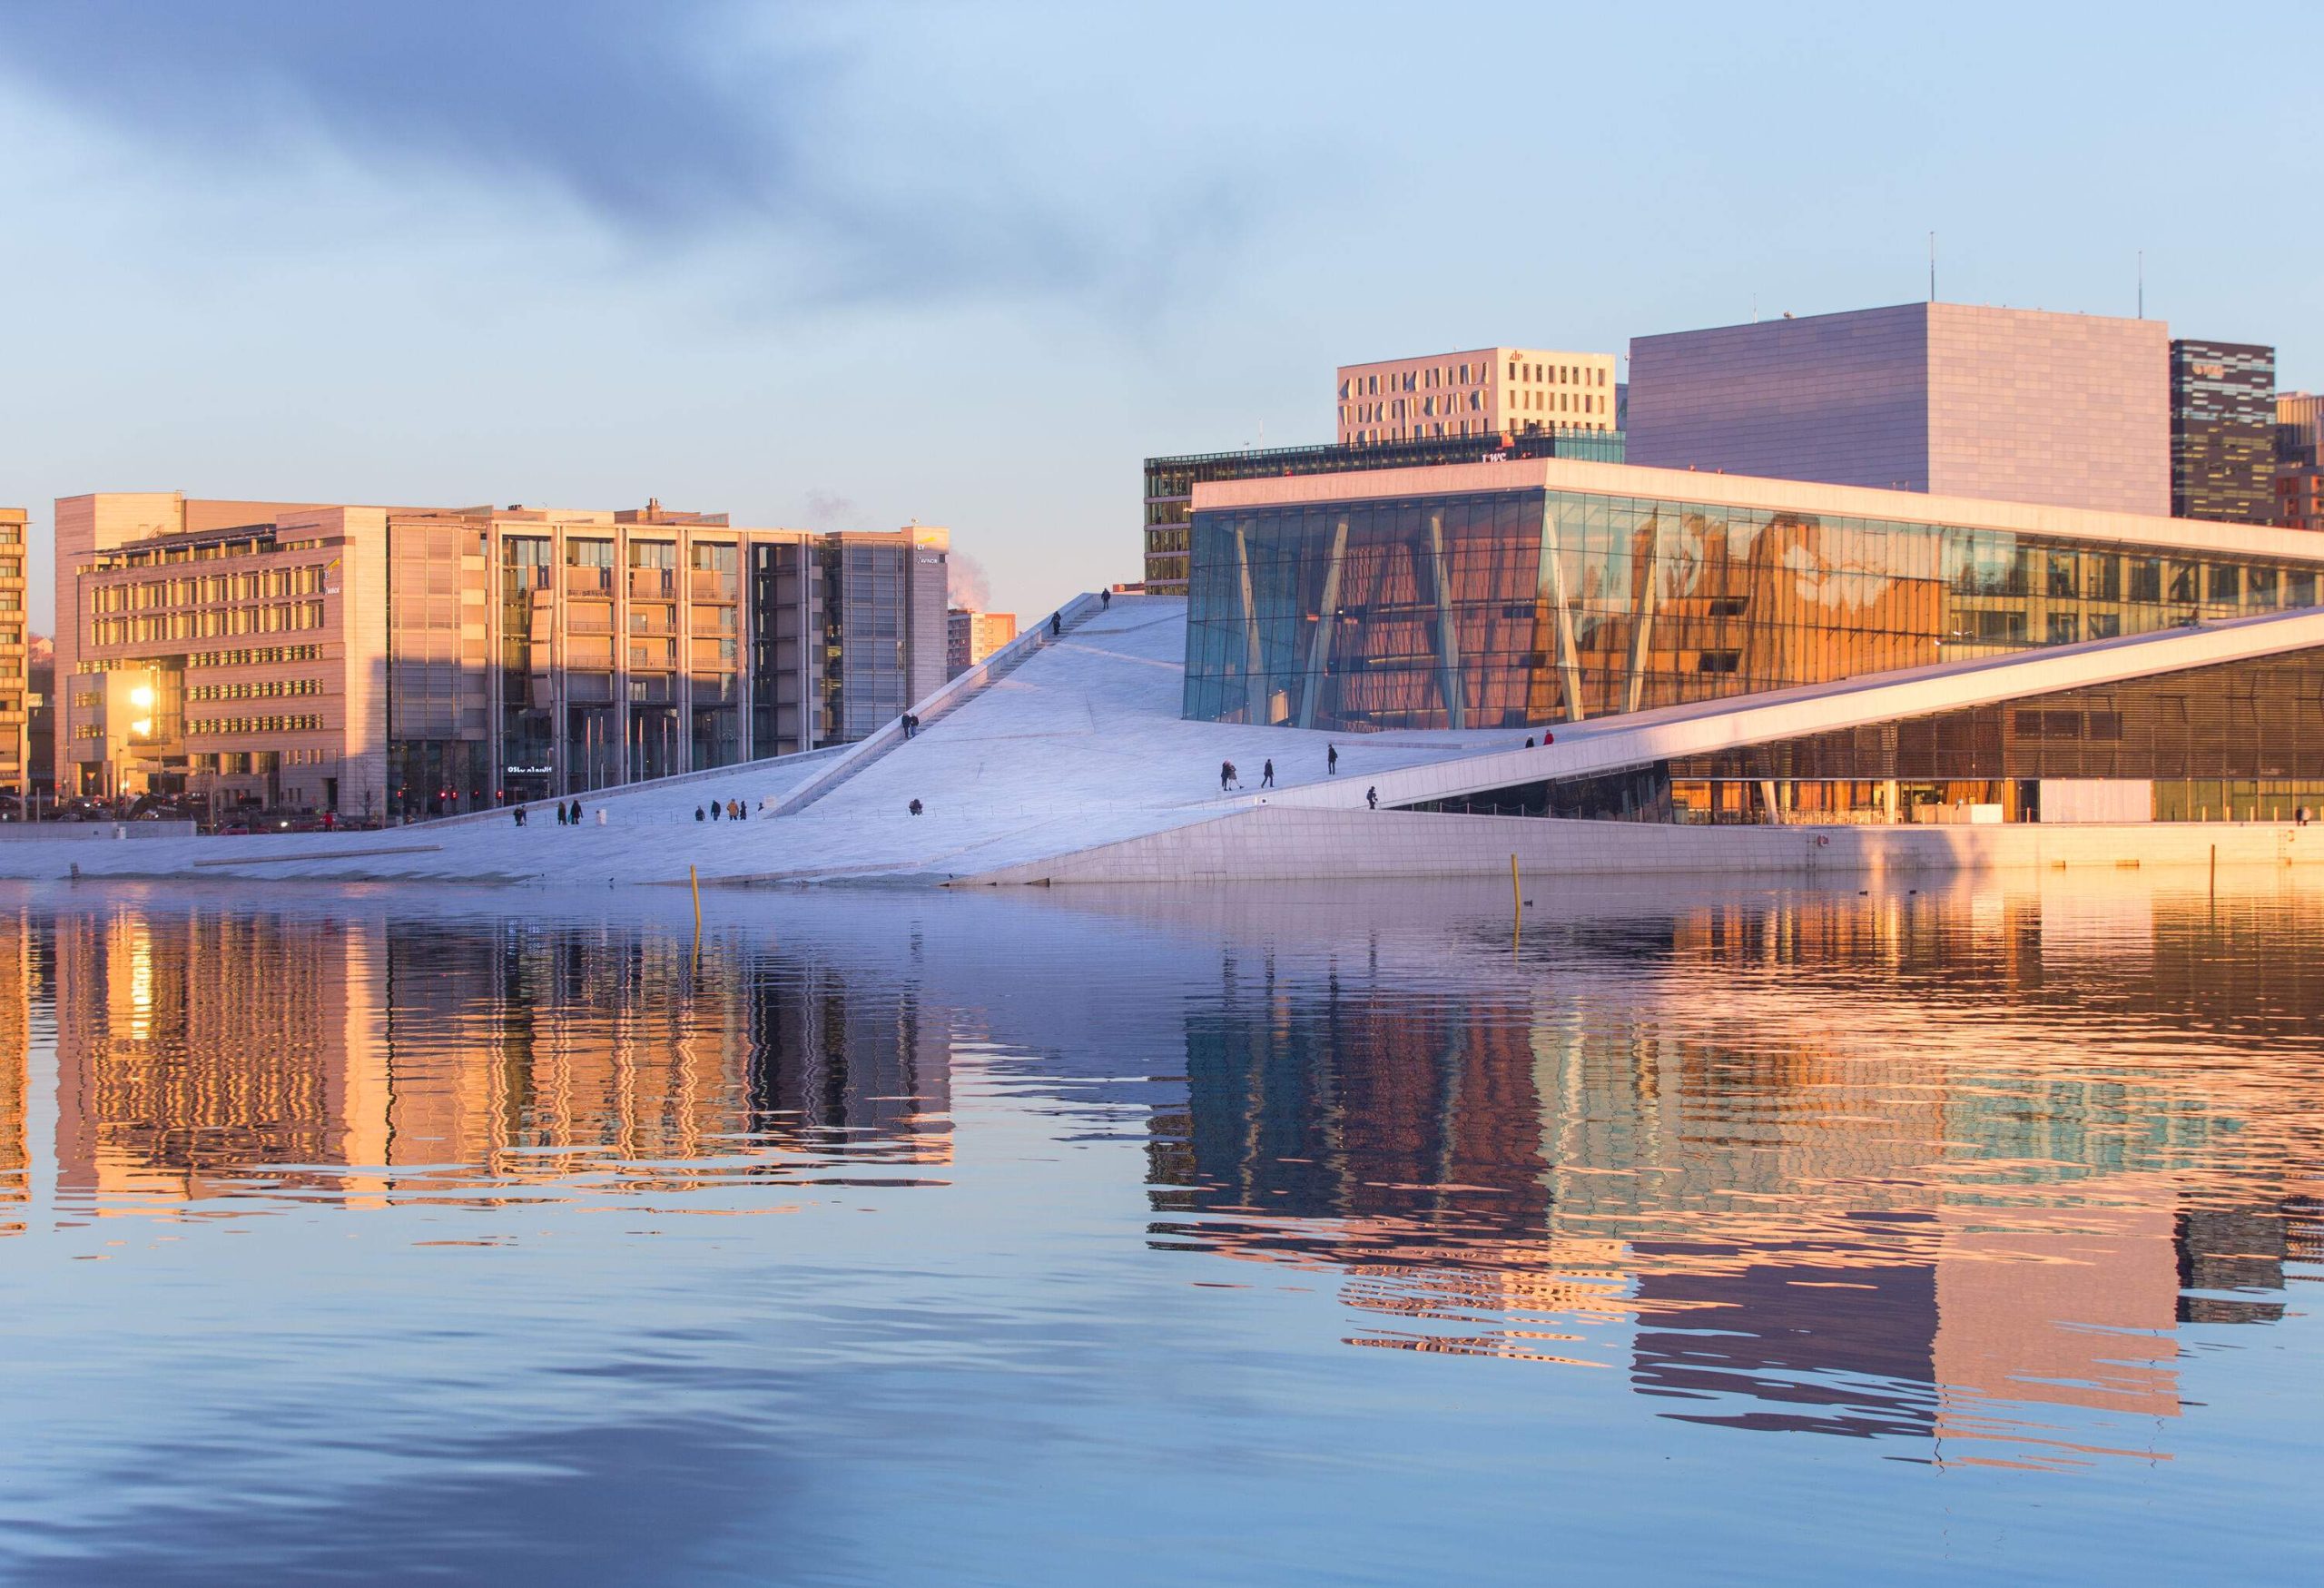 People strolling on the inclined granite surface and glass-covered Oslo Opera House façade in a waterfront neighbourhood.